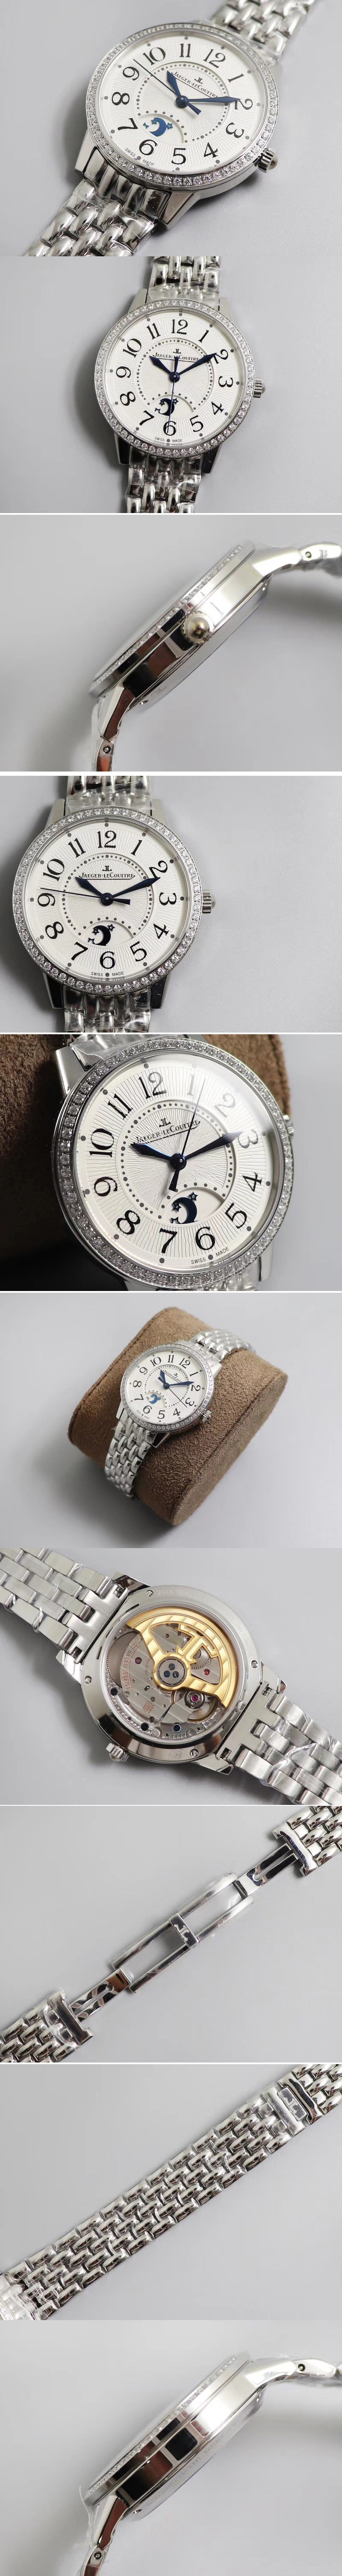 Replica Jaeger-LeCoultre Watches